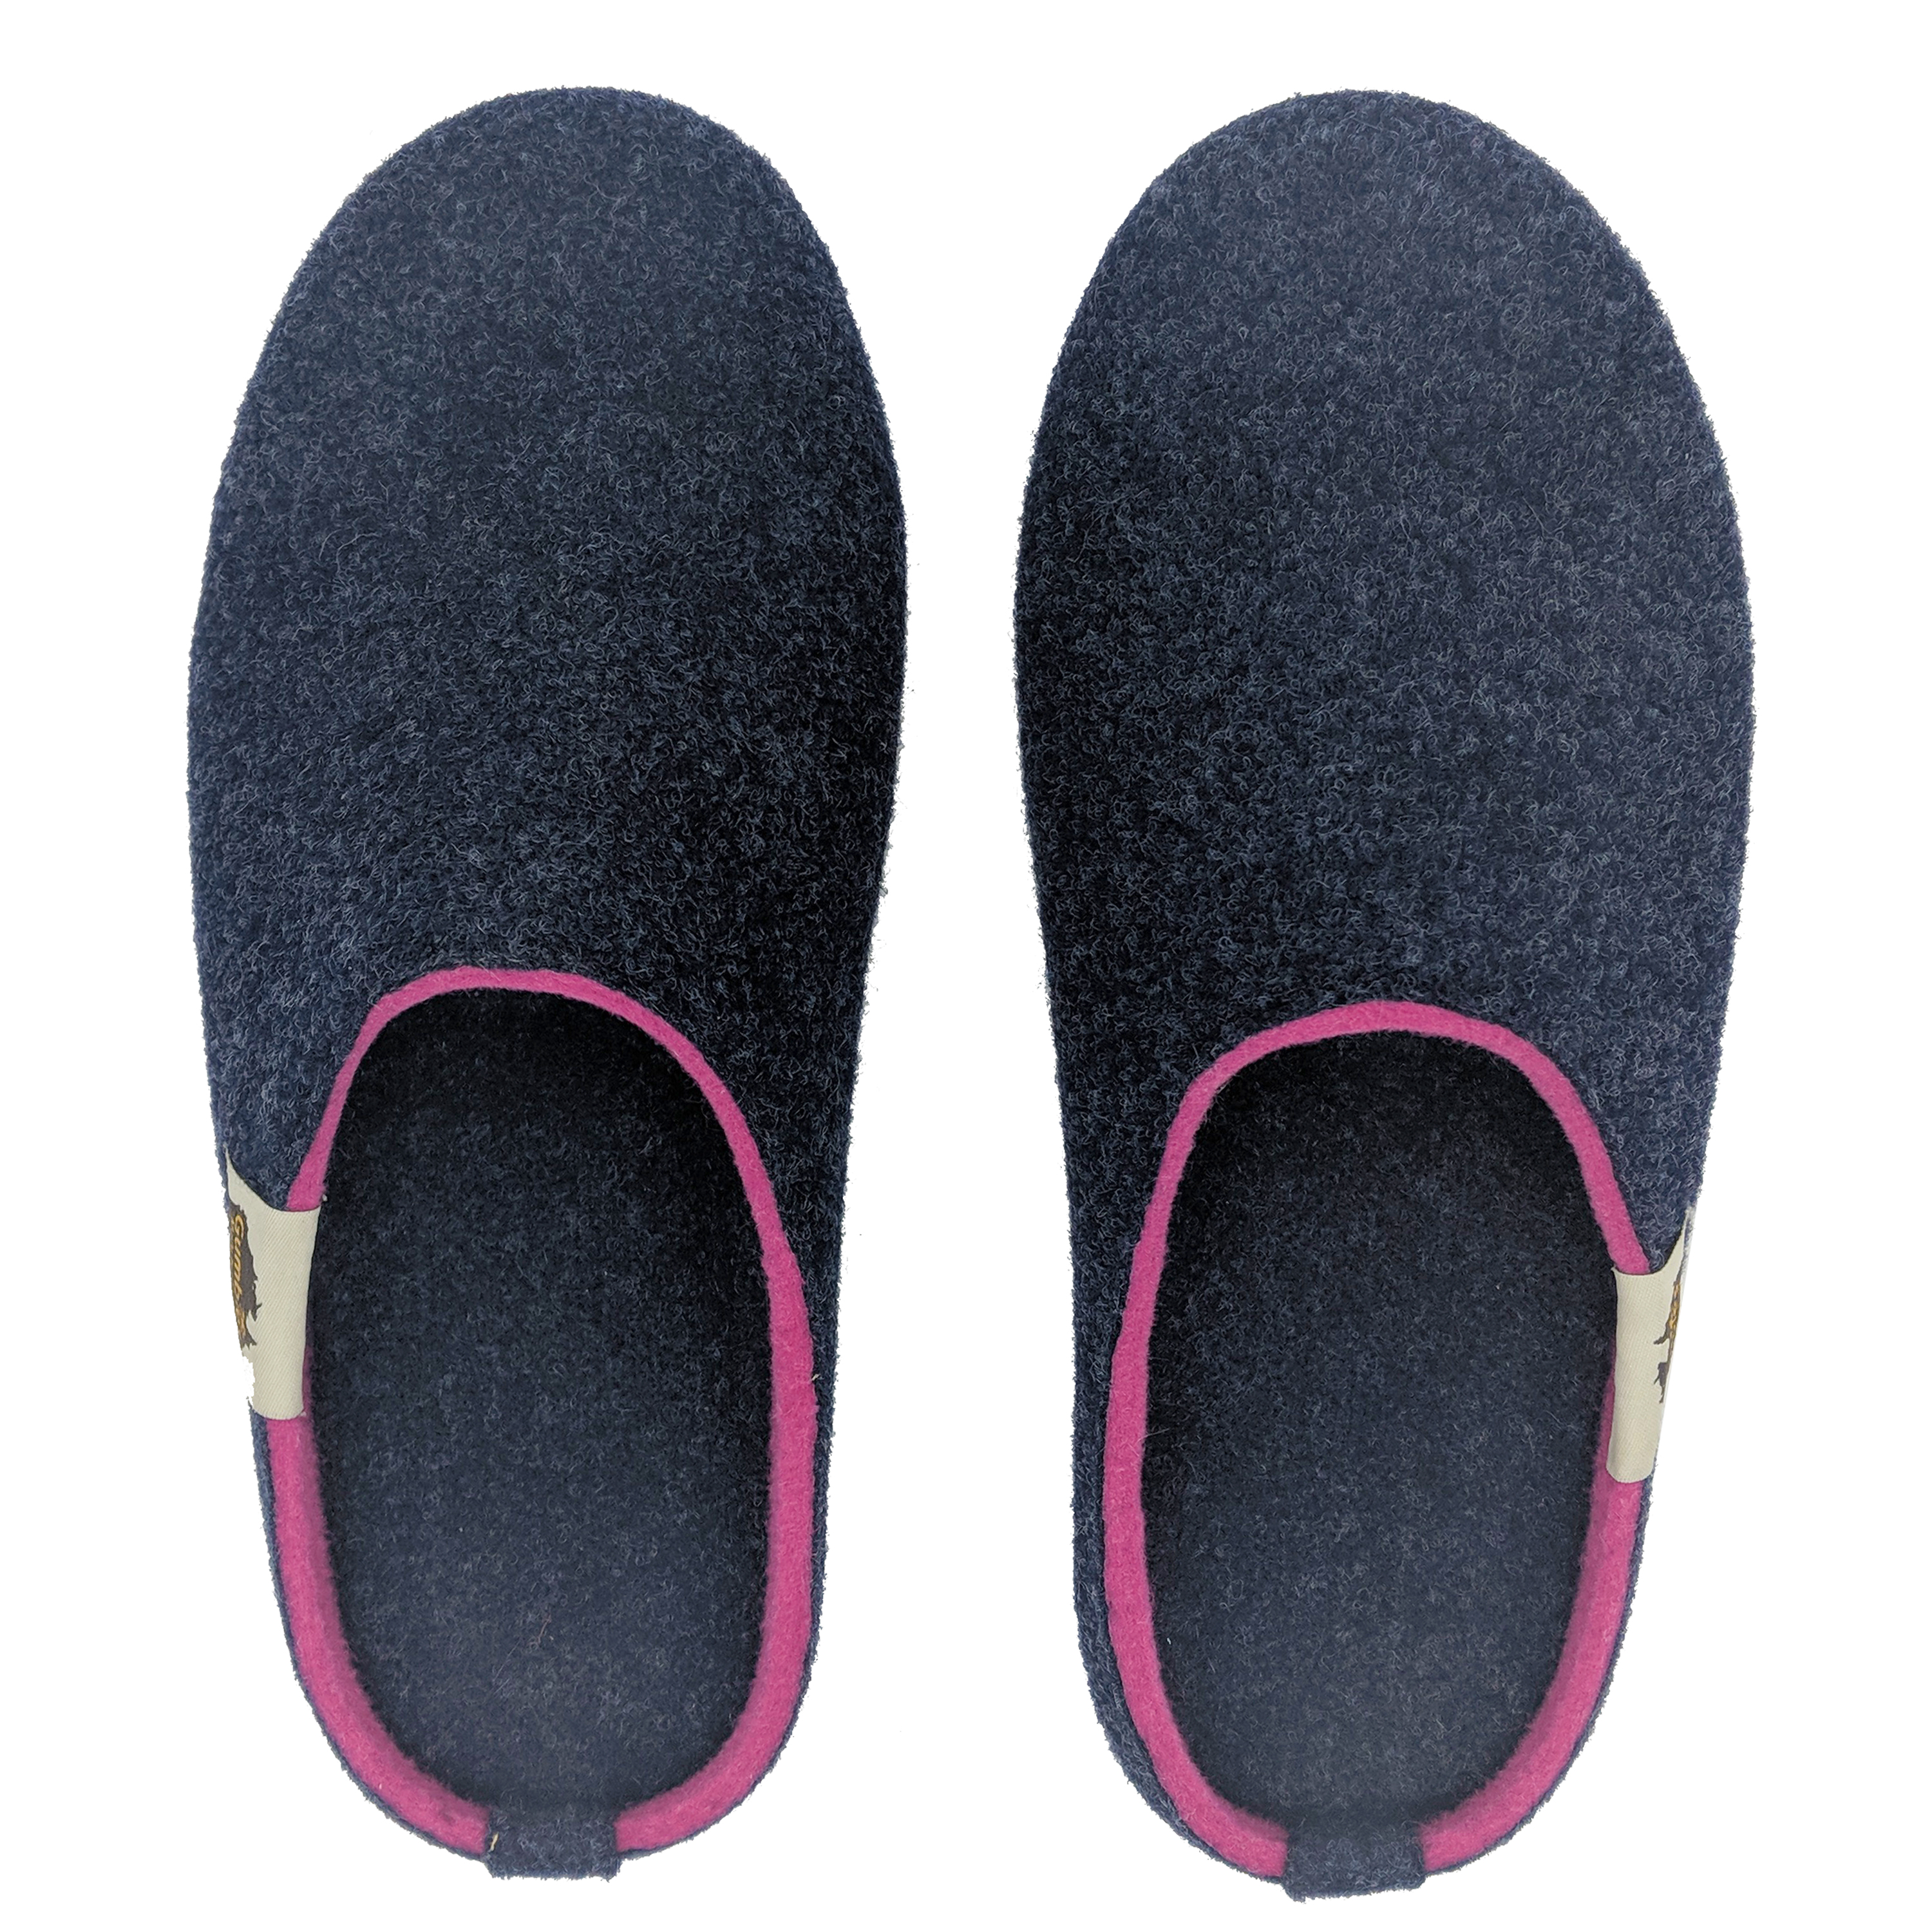 GUMBIES – Outback Slipper, Navy Pink 